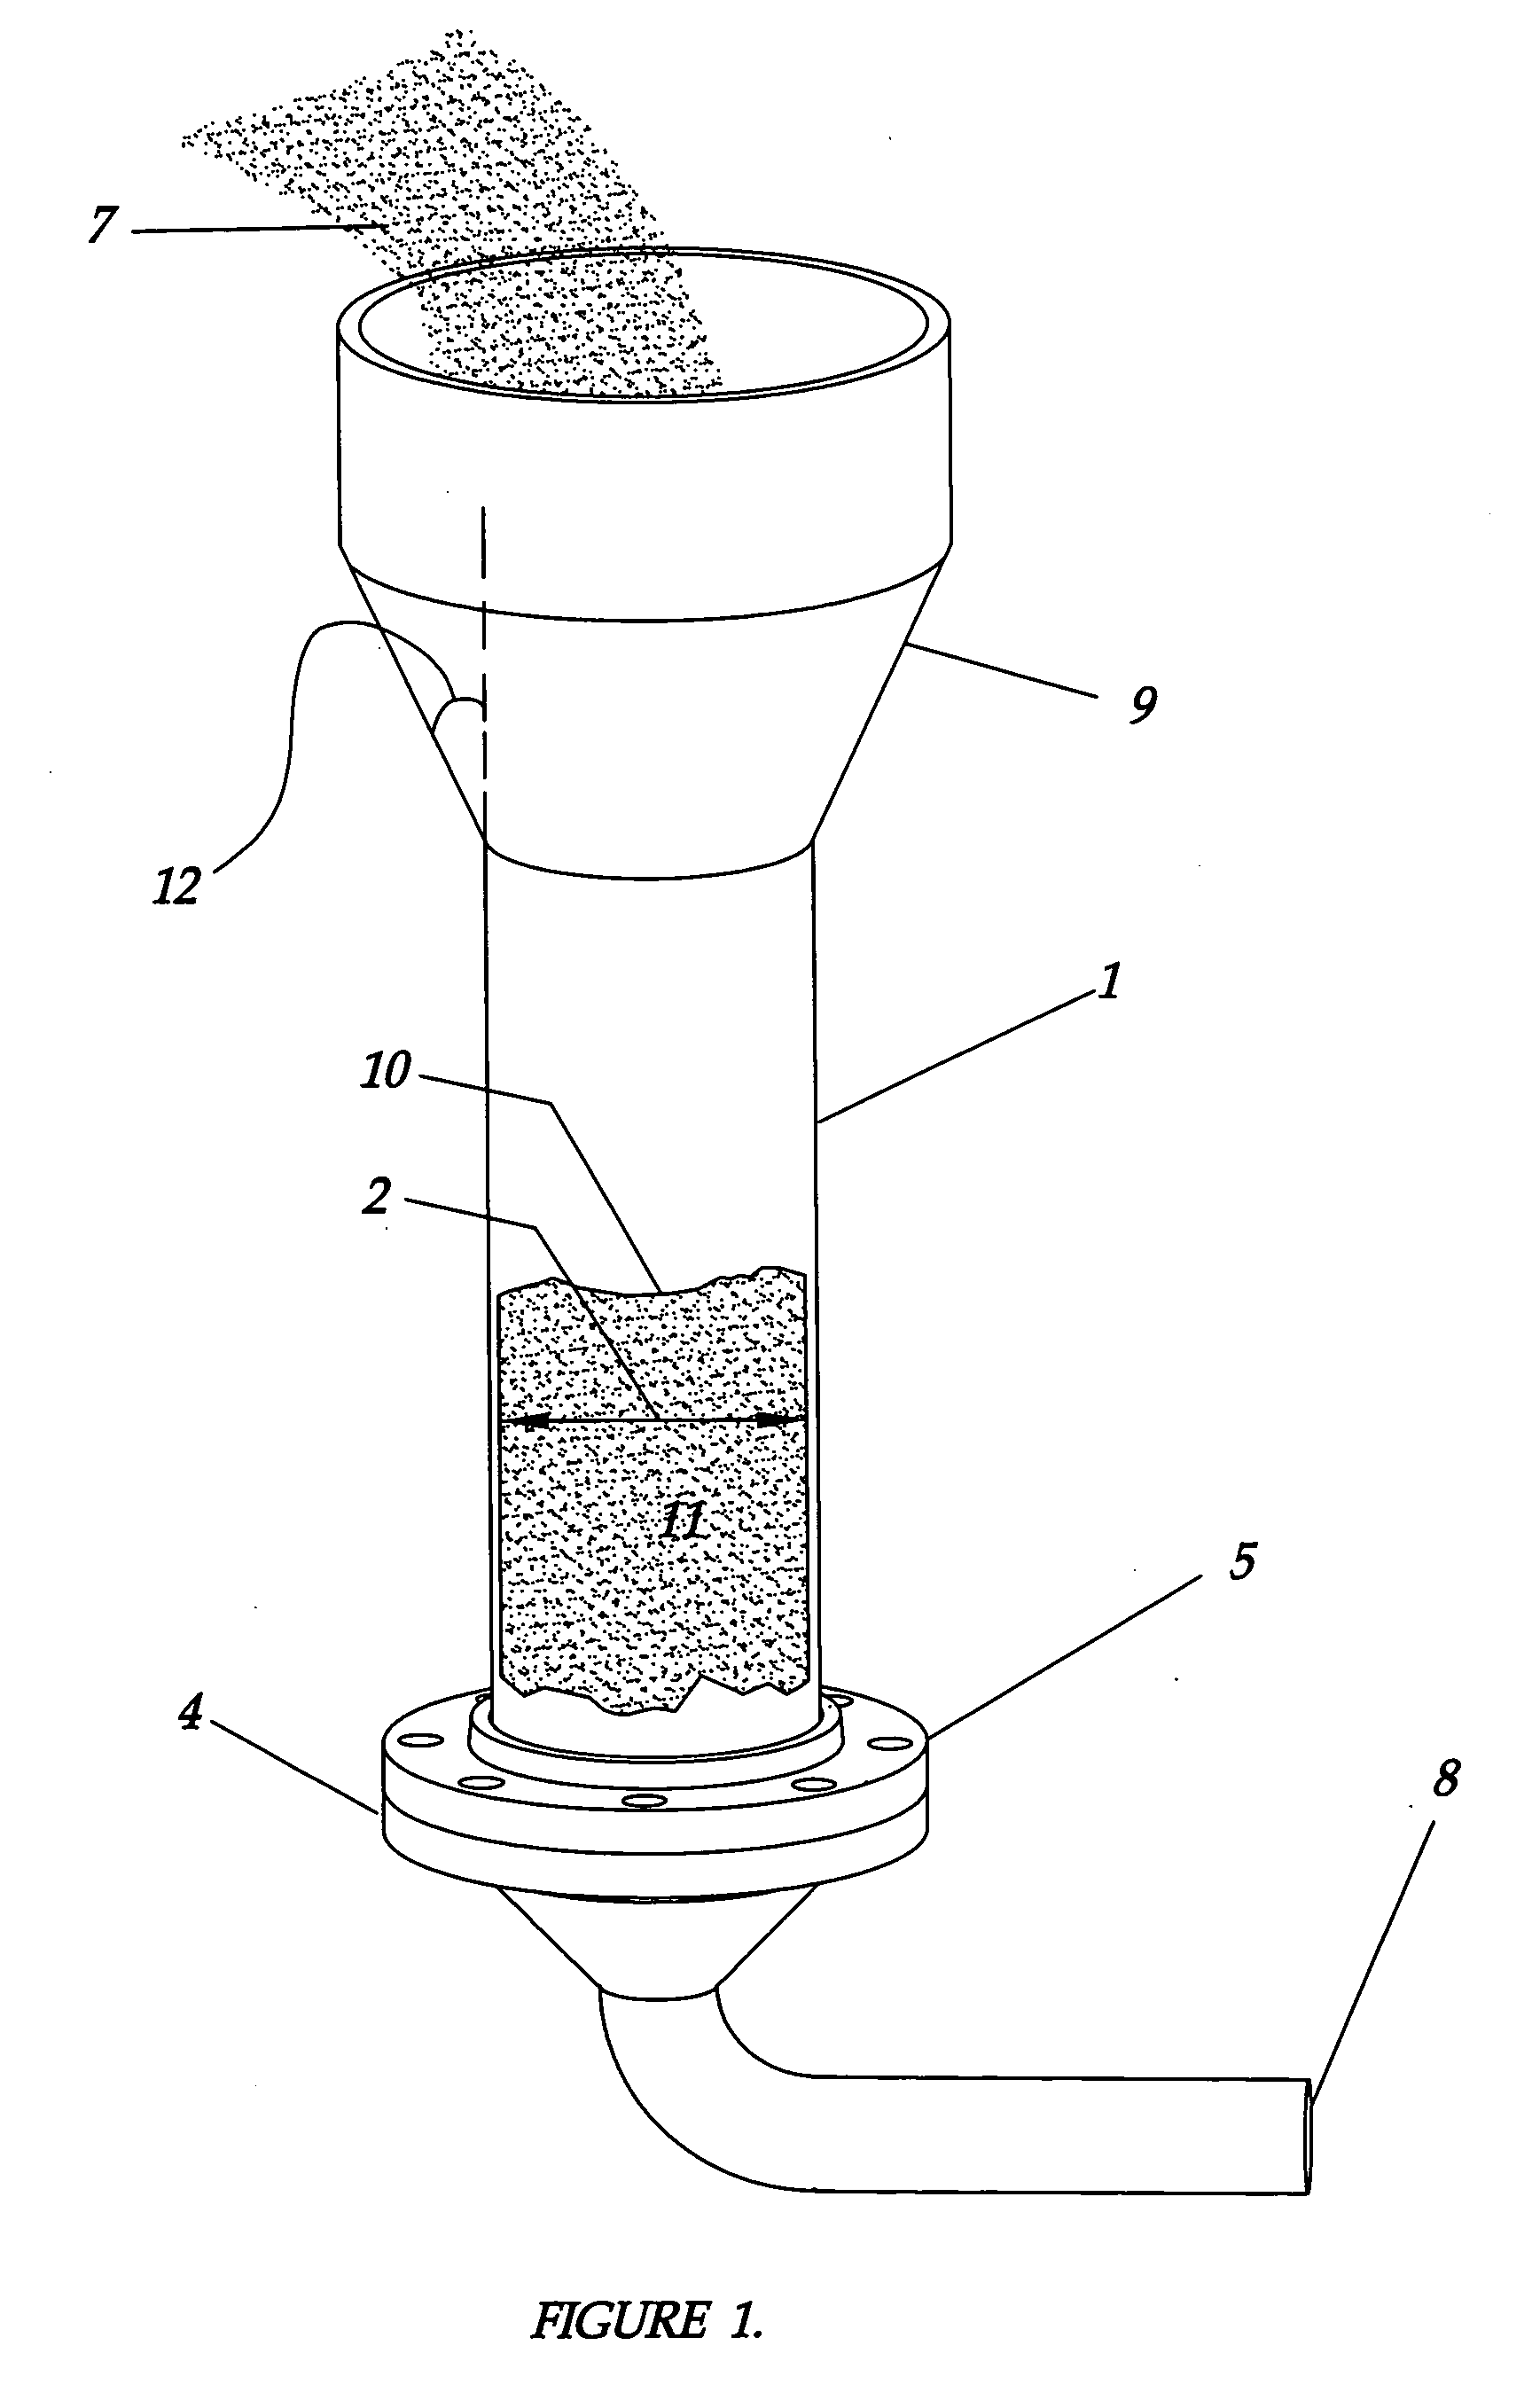 Method of producing trichlorosilane (TCS) rich product stably from a fluidized gas phase reactor (FBR) and the structure of the reactor